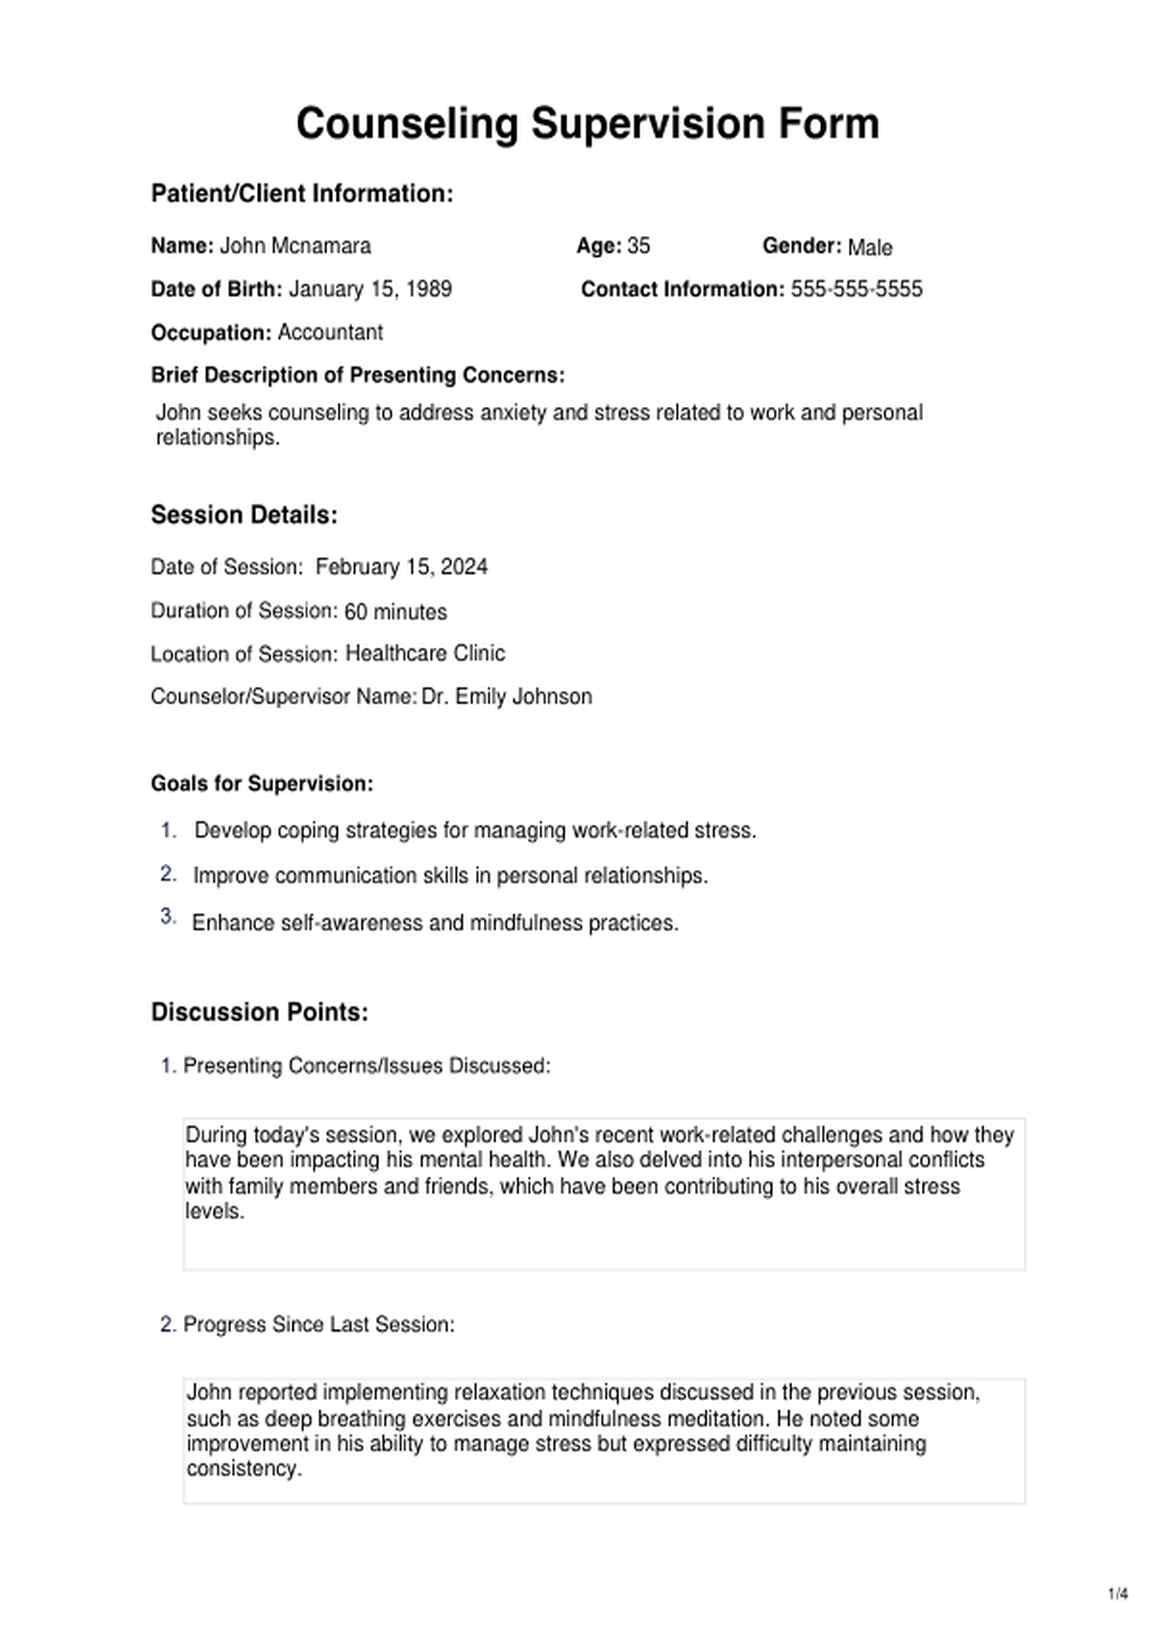 Counseling Supervision Form PDF Example